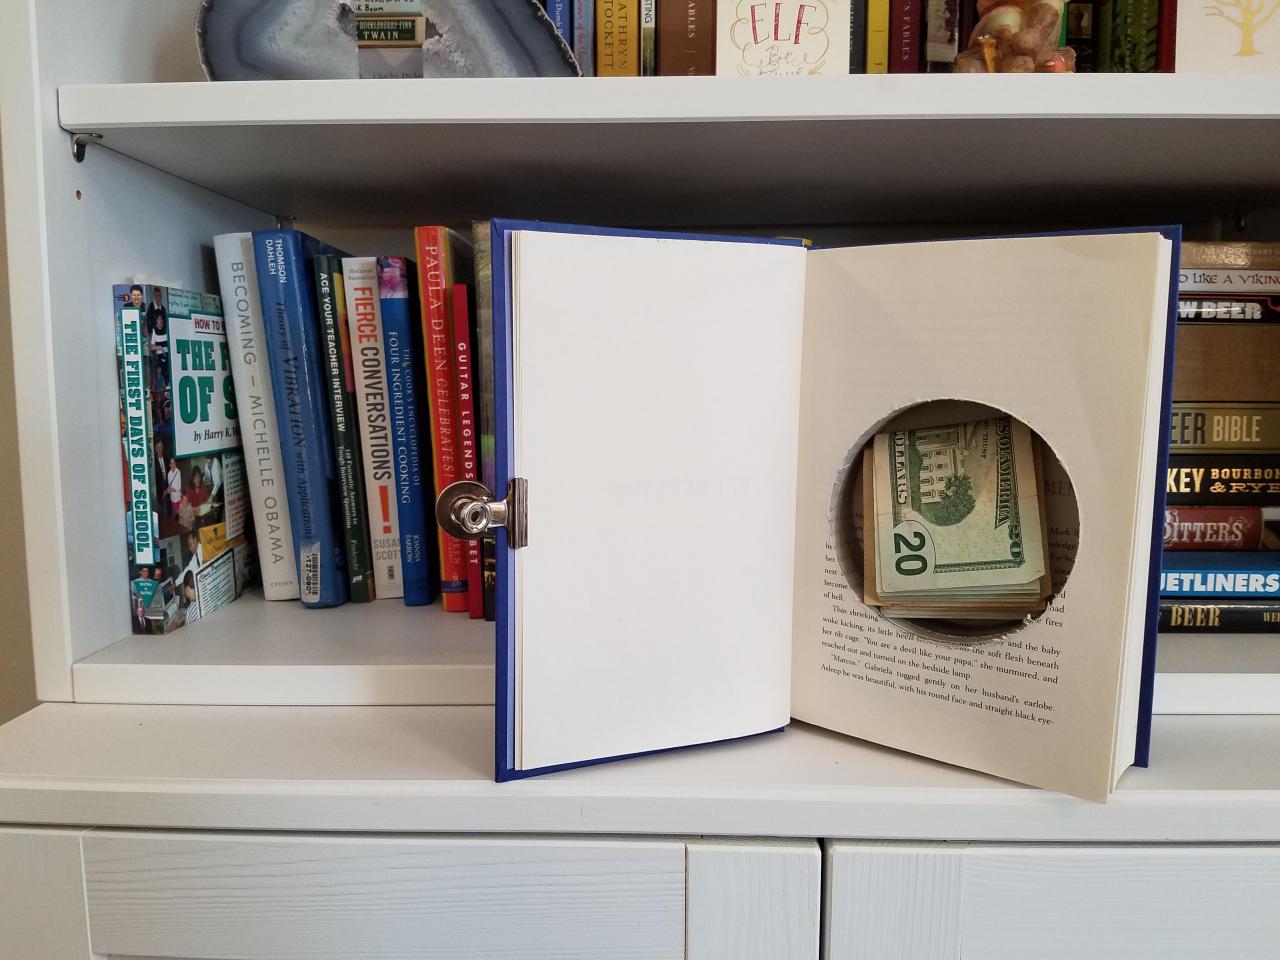 I just started making hidden book safes from the hardbacks at my local